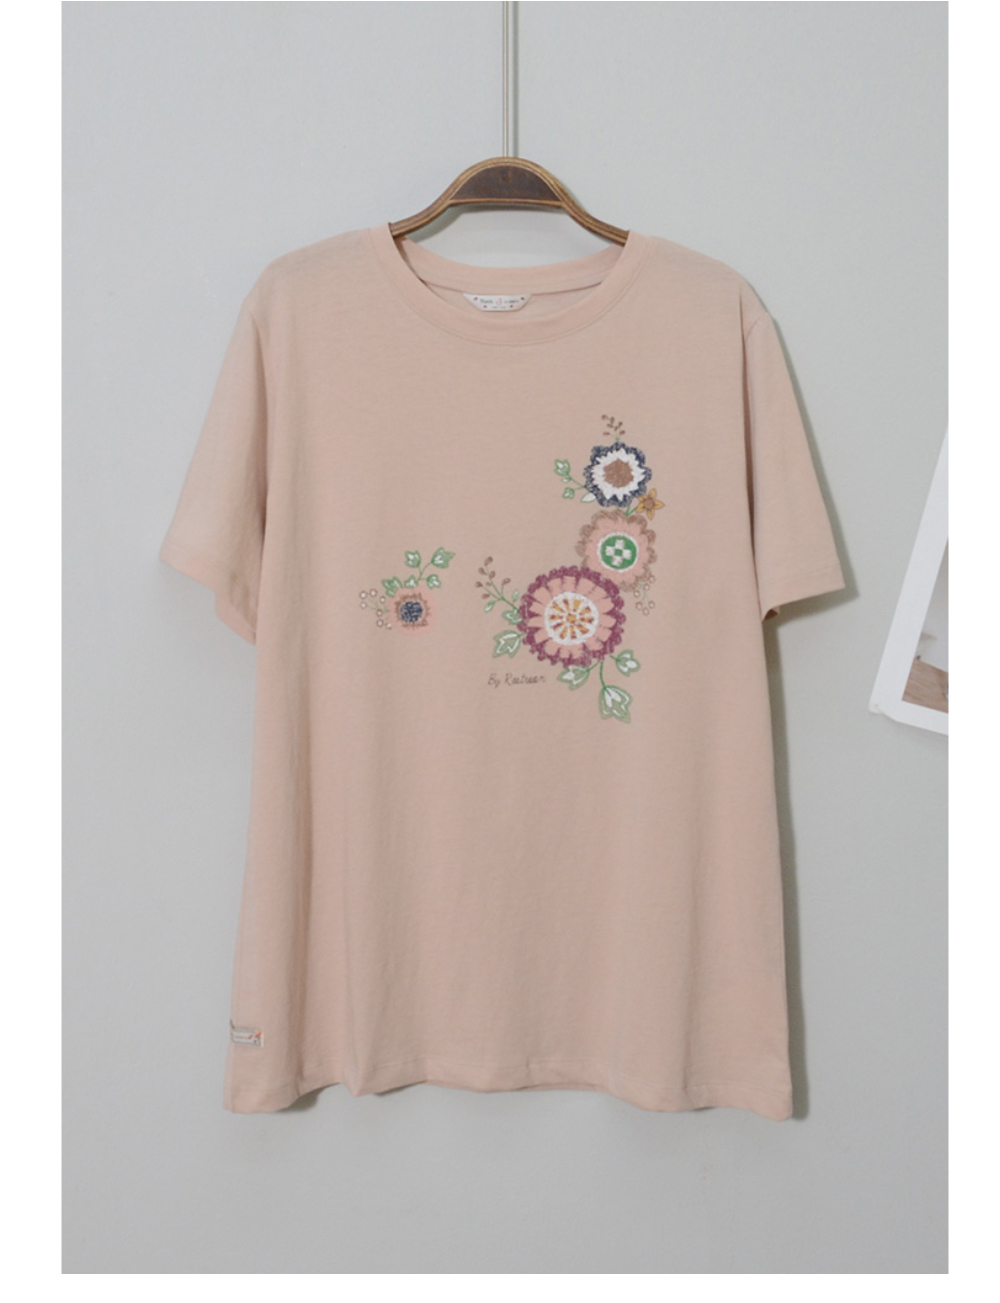 short sleeved tee cream color image-S1L39